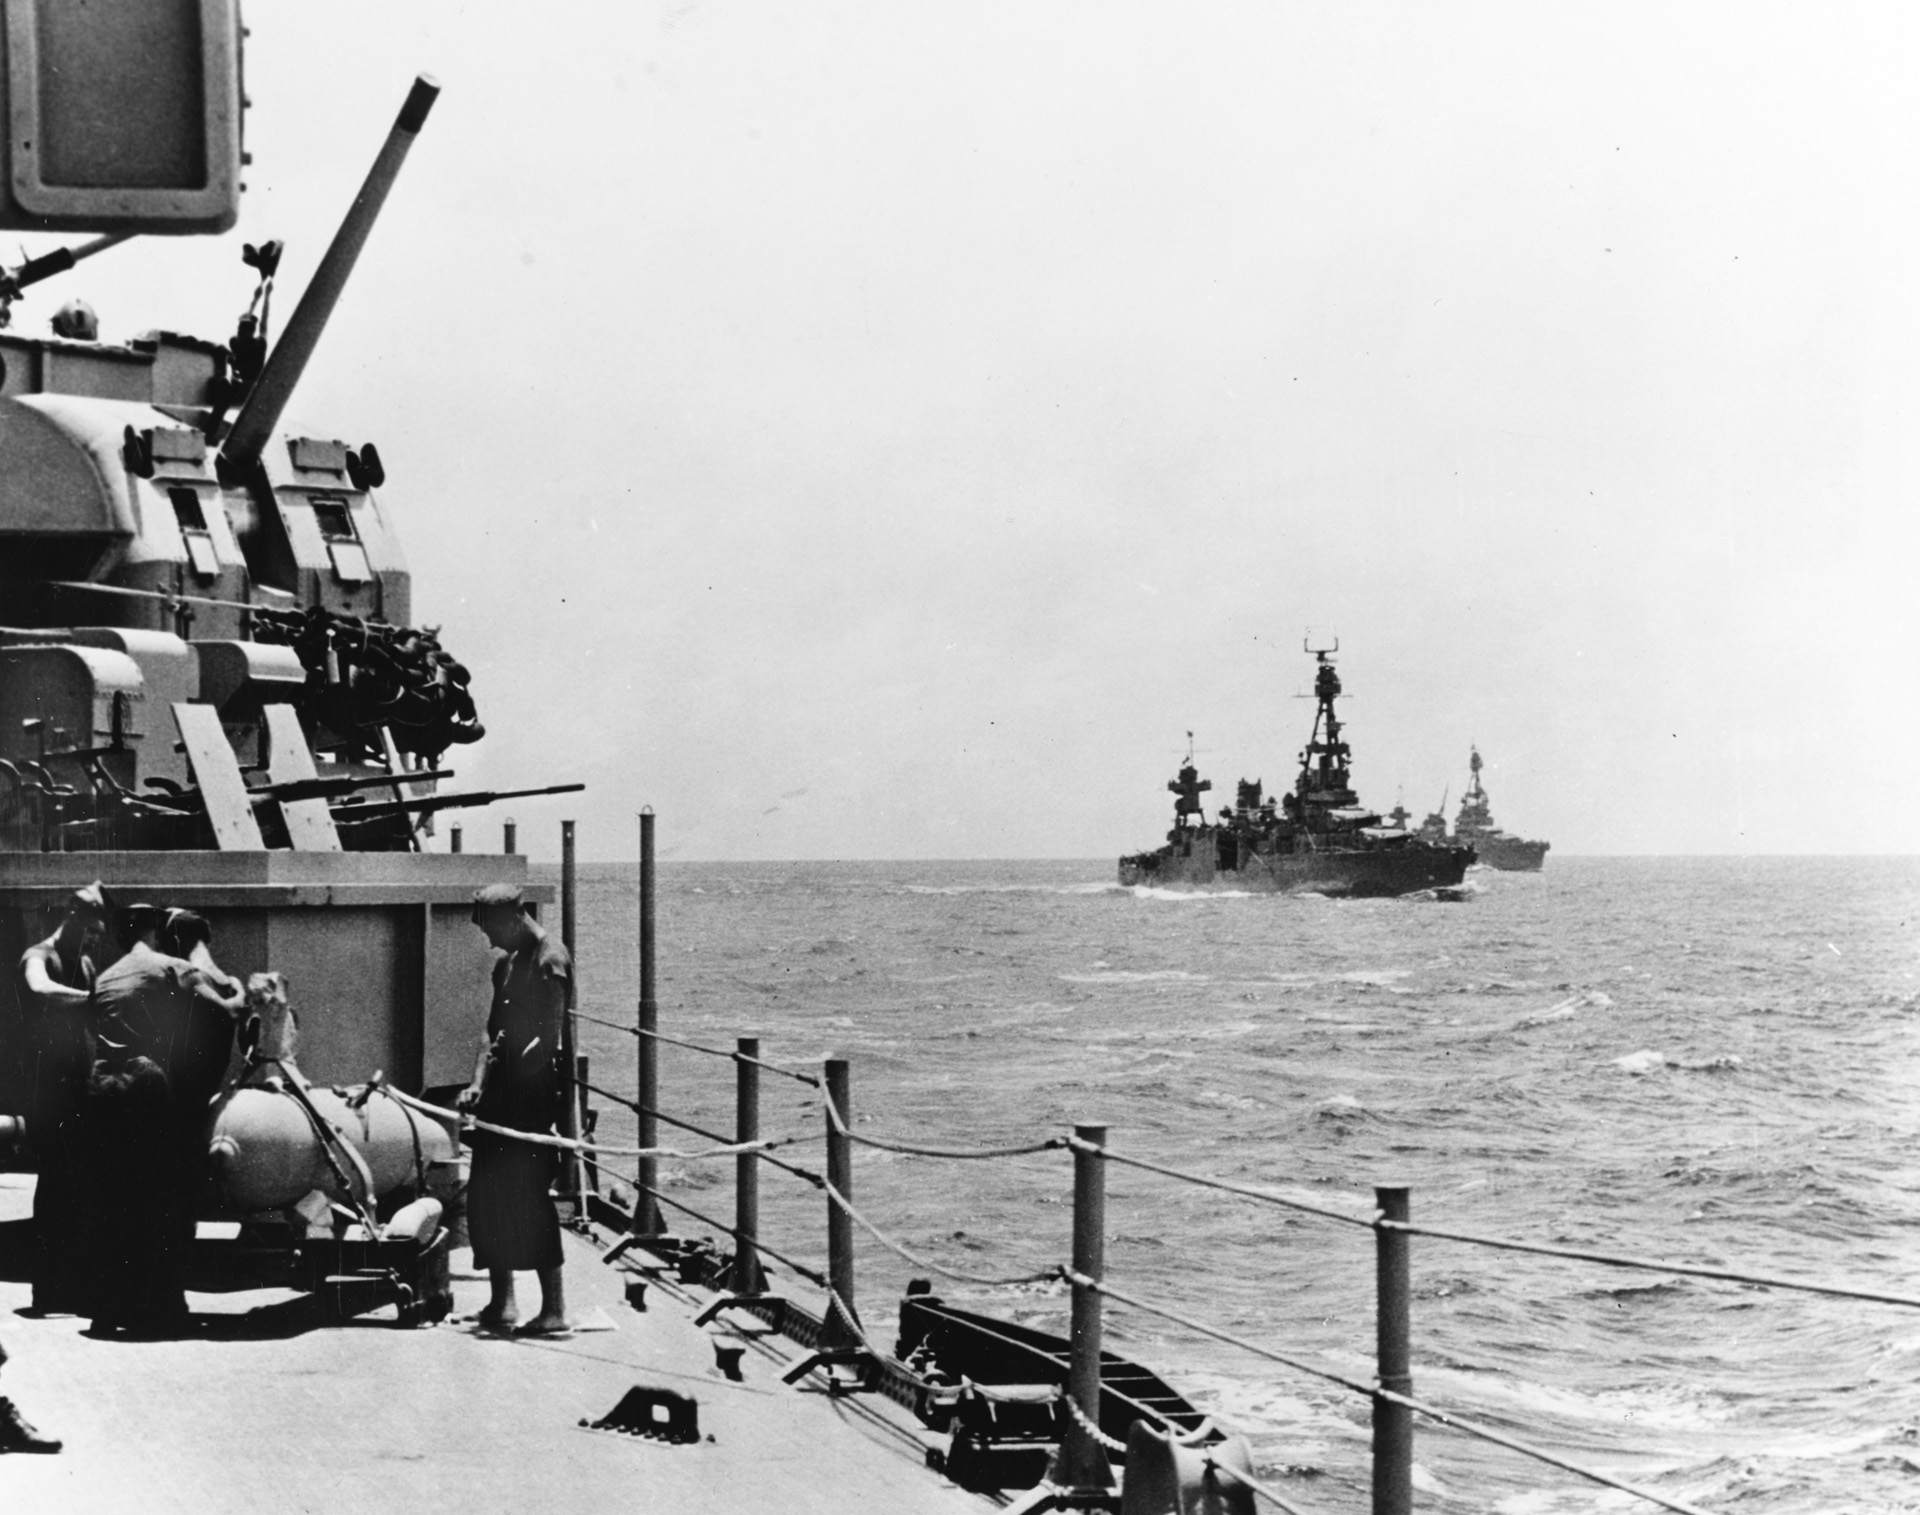 Sailors aboard the cruiser USS Wichita work to make ready a paravane, an anti-mine device, as other cruisers of Task Force 18 sail toward Rennell Island. The USS Chicago, center right, was sunk by Japanese warplanes on January 30, 1943, the day after this photo was taken. 